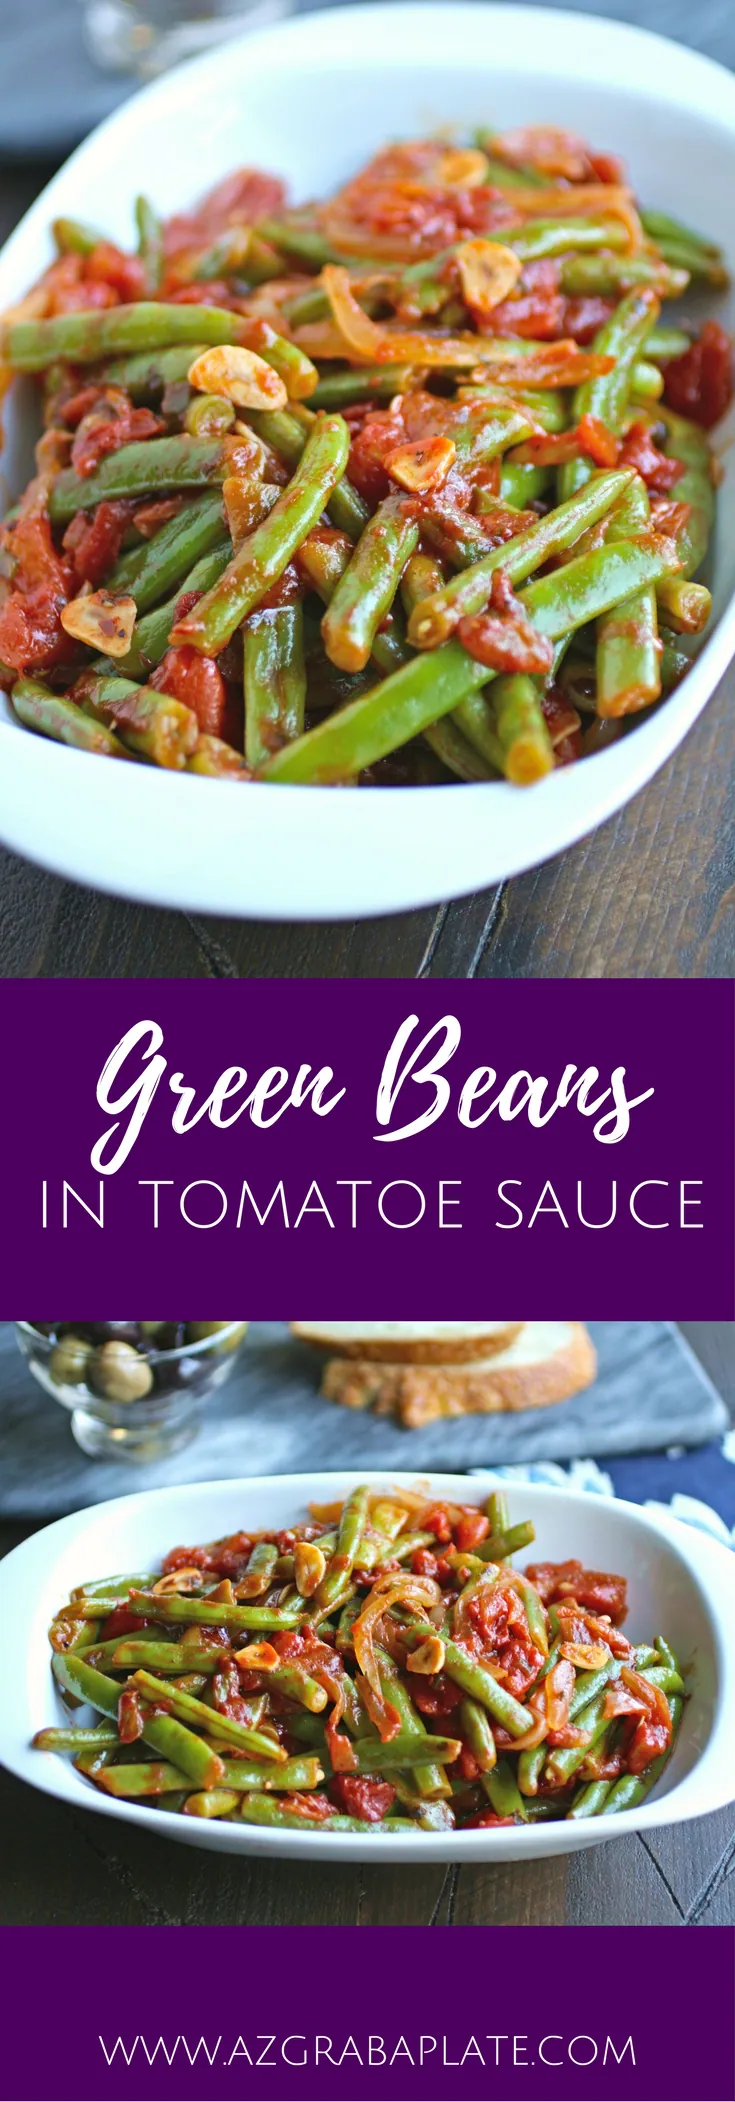 Green Beans in Tomato Sauce is a simple, straightforward, and delicious side dish. You'll love the fresh flavors and colors combined in this veggie dish.